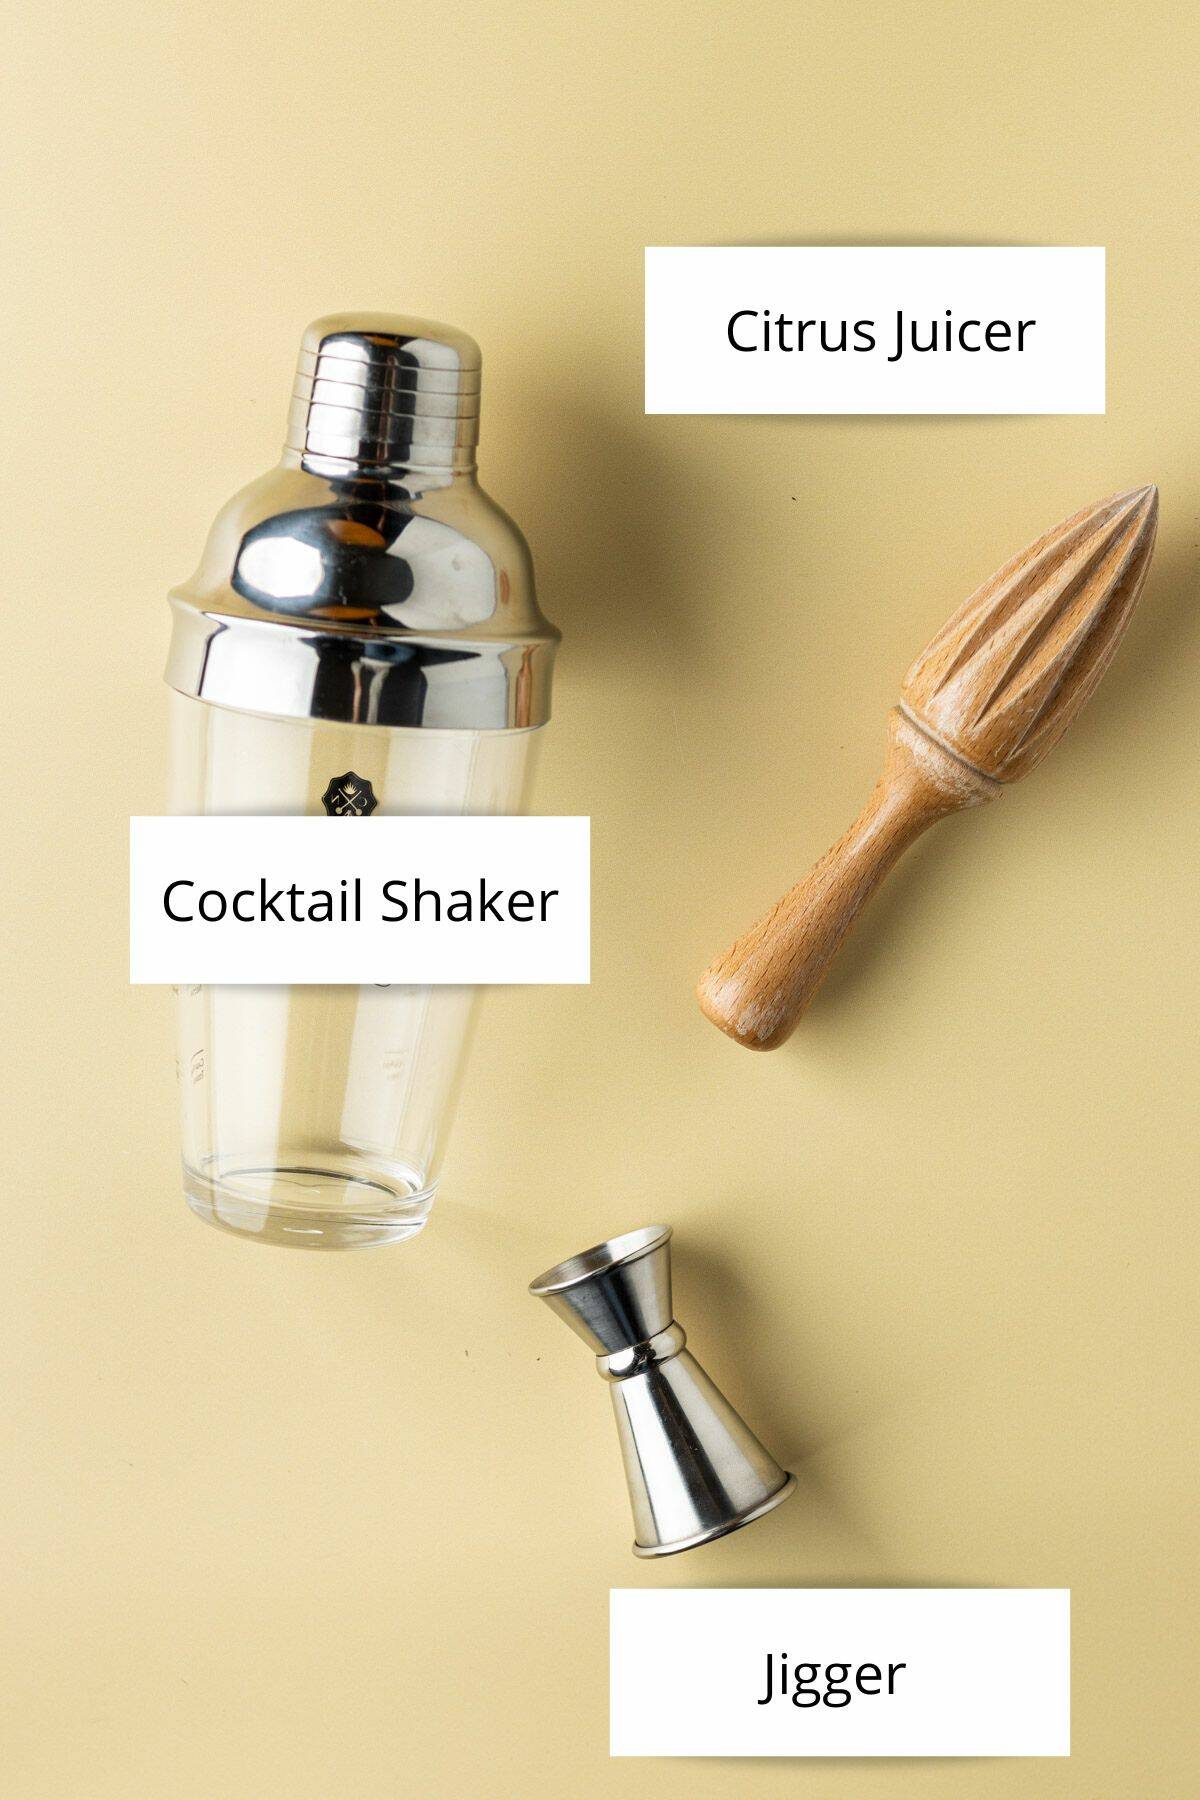 Overhead view of a cocktail shaker, citrus juicer and jigger on a yellow backdrop.